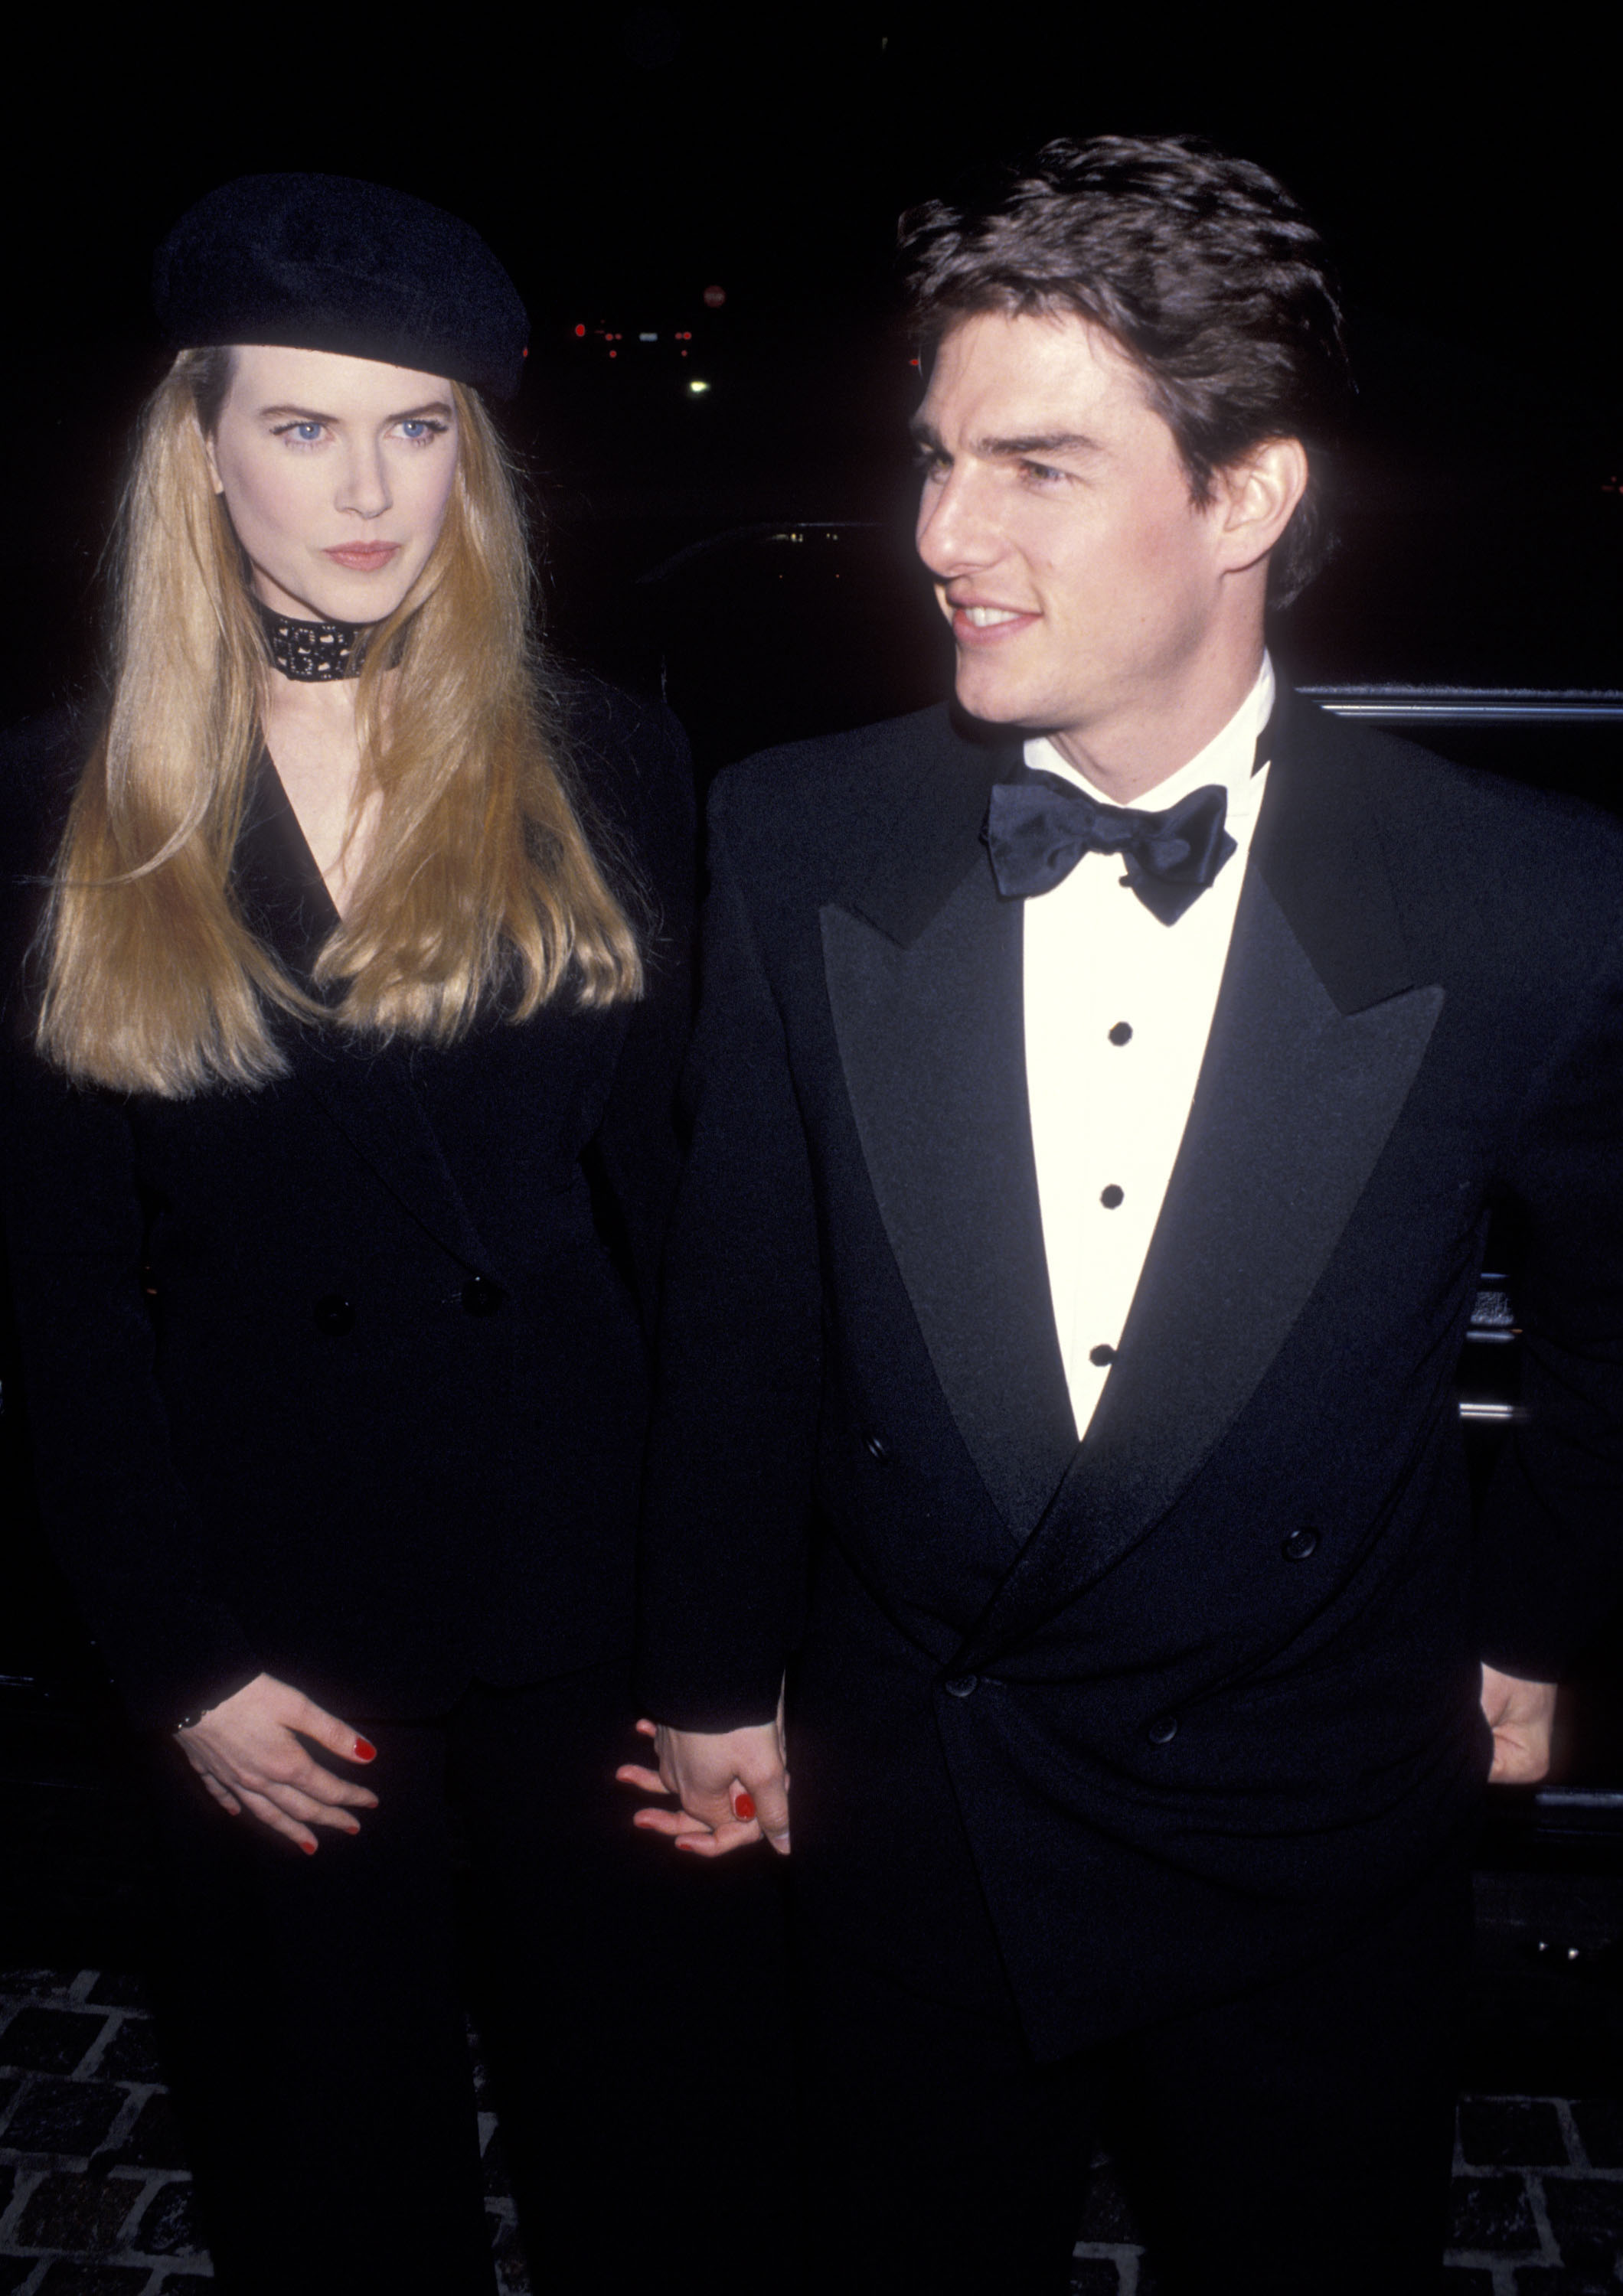 Nicole Kidman and Tom Cruise attend the 50th Annual Golden Globe Awards on January 23, 1993